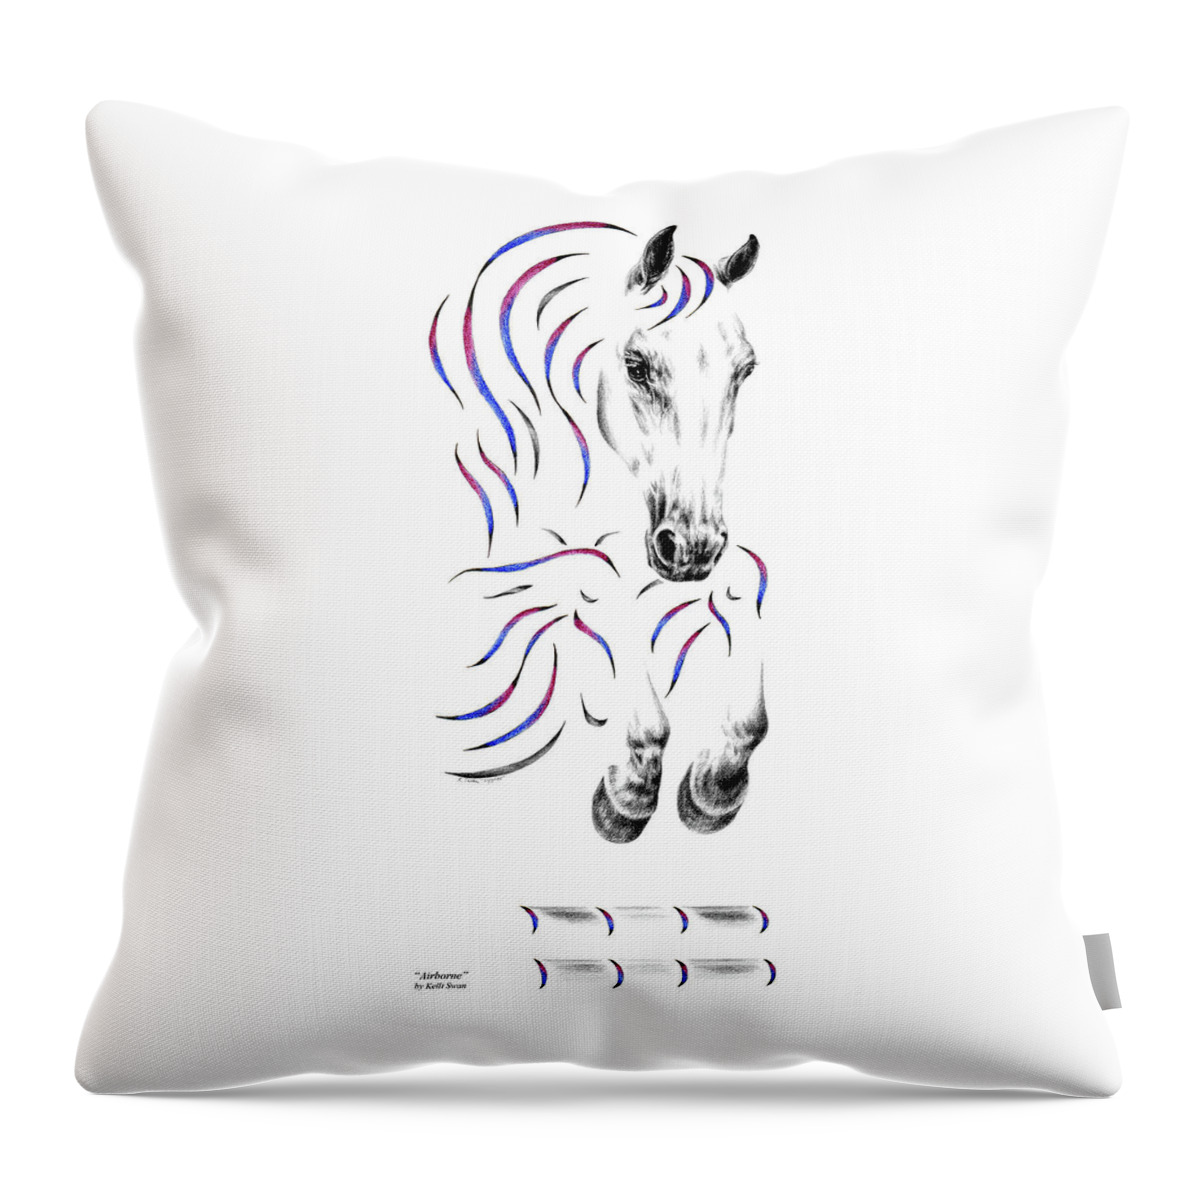 Jumper Throw Pillow featuring the drawing Contemporary Jumper Horse by Kelli Swan